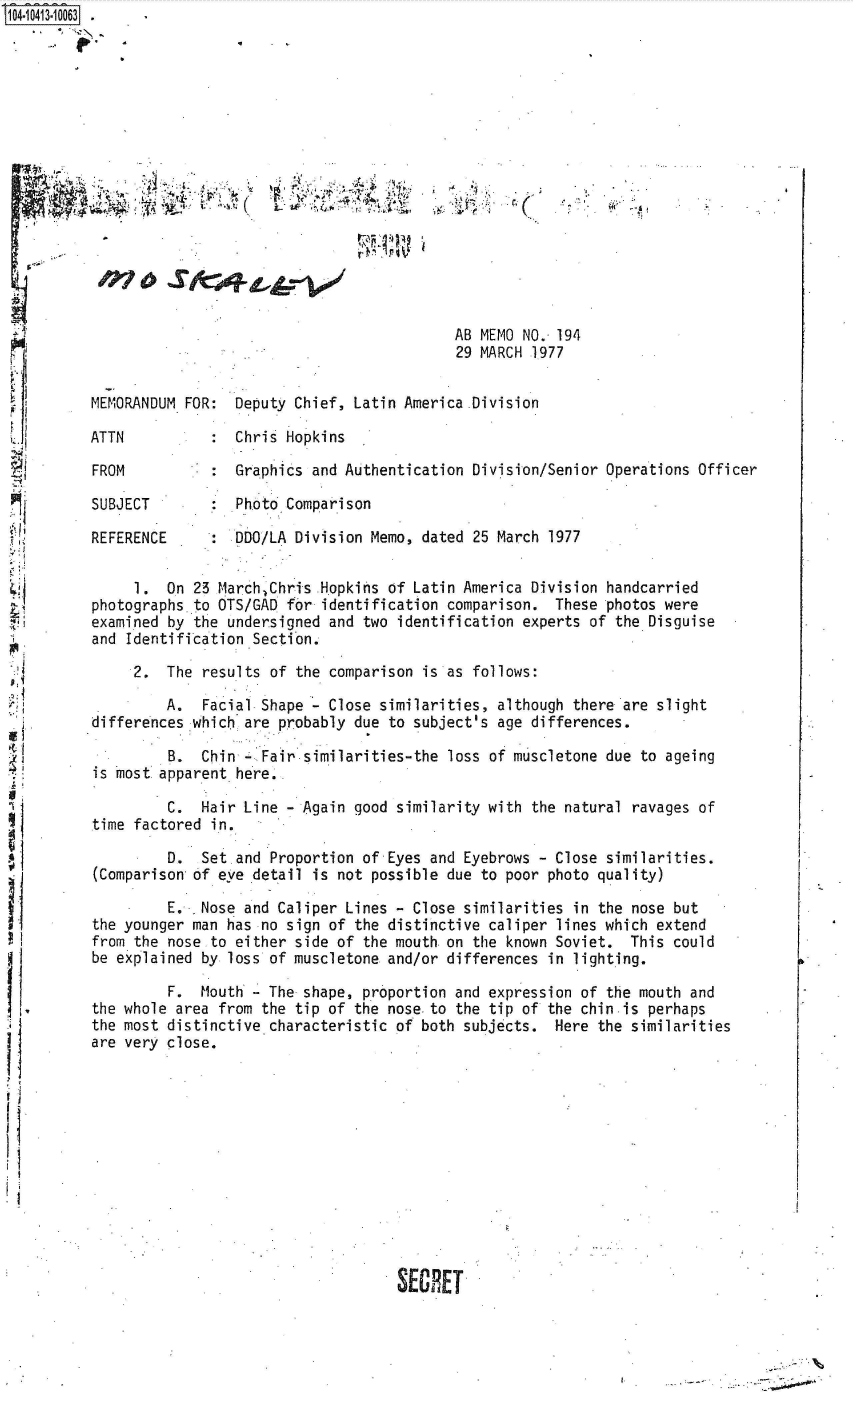 handle is hein.jfk/jfkarch48320 and id is 1 raw text is: S1O4~iO413~1OO63


                                            AB MEMO NO. 194
                                            29 MARCH 1977


MEMORANDUM FOR:  Deputy Chief,  Latin America .Division

ATTN             Chris Hopkins

FROM           : Graphics  and Authentication Division/Senior Operations Officer

SUBJECT        : Photo Comparison

REFERENCE      : DDO/LA Division  Memo, dated 25 March 1977


     1.  On 23 March.Chris  Hopkins of Latin America Division handcarried
photographs to OTS/GAD  for identification comparison.  These photos were
examined by the undersigned  and two identification experts of the Disguise
and Identification Section.

     2.  The results  of the comparison is as follows:

         A.  Facial Shape    Close similarities, although there are slight
differences which are  probably due to subject's age differences.

         B.  Chin -.Fair  similarities-the loss of muscletone due to ageing
is most apparent here.

         C.  Hair Line  - Again good similarity with the natural ravages of
time factored in.

         D.  Set and  Proportion of Eyes and Eyebrows - Close similarities.
(Comparison of eve detail  is not possible due to poor photo quality)
         E.  Nose and Caliper  Lines - Close similarities in the nose but
the younger man has no  sign of the distinctive caliper lines which extend
from the nose to either  side of the mouth. on the known Soviet. This could
be explained by loss of muscletone  and/or differences in lighting.

         F.  Mouth - The  shape, proportion and expression of the mouth and
the whole area from the  tip of the nose.to the tip of the chin is perhaps
the most distinctive characteristic  of both subjects.  Here the similarities
are very close.












                                     SECRET


......................................:~


I


